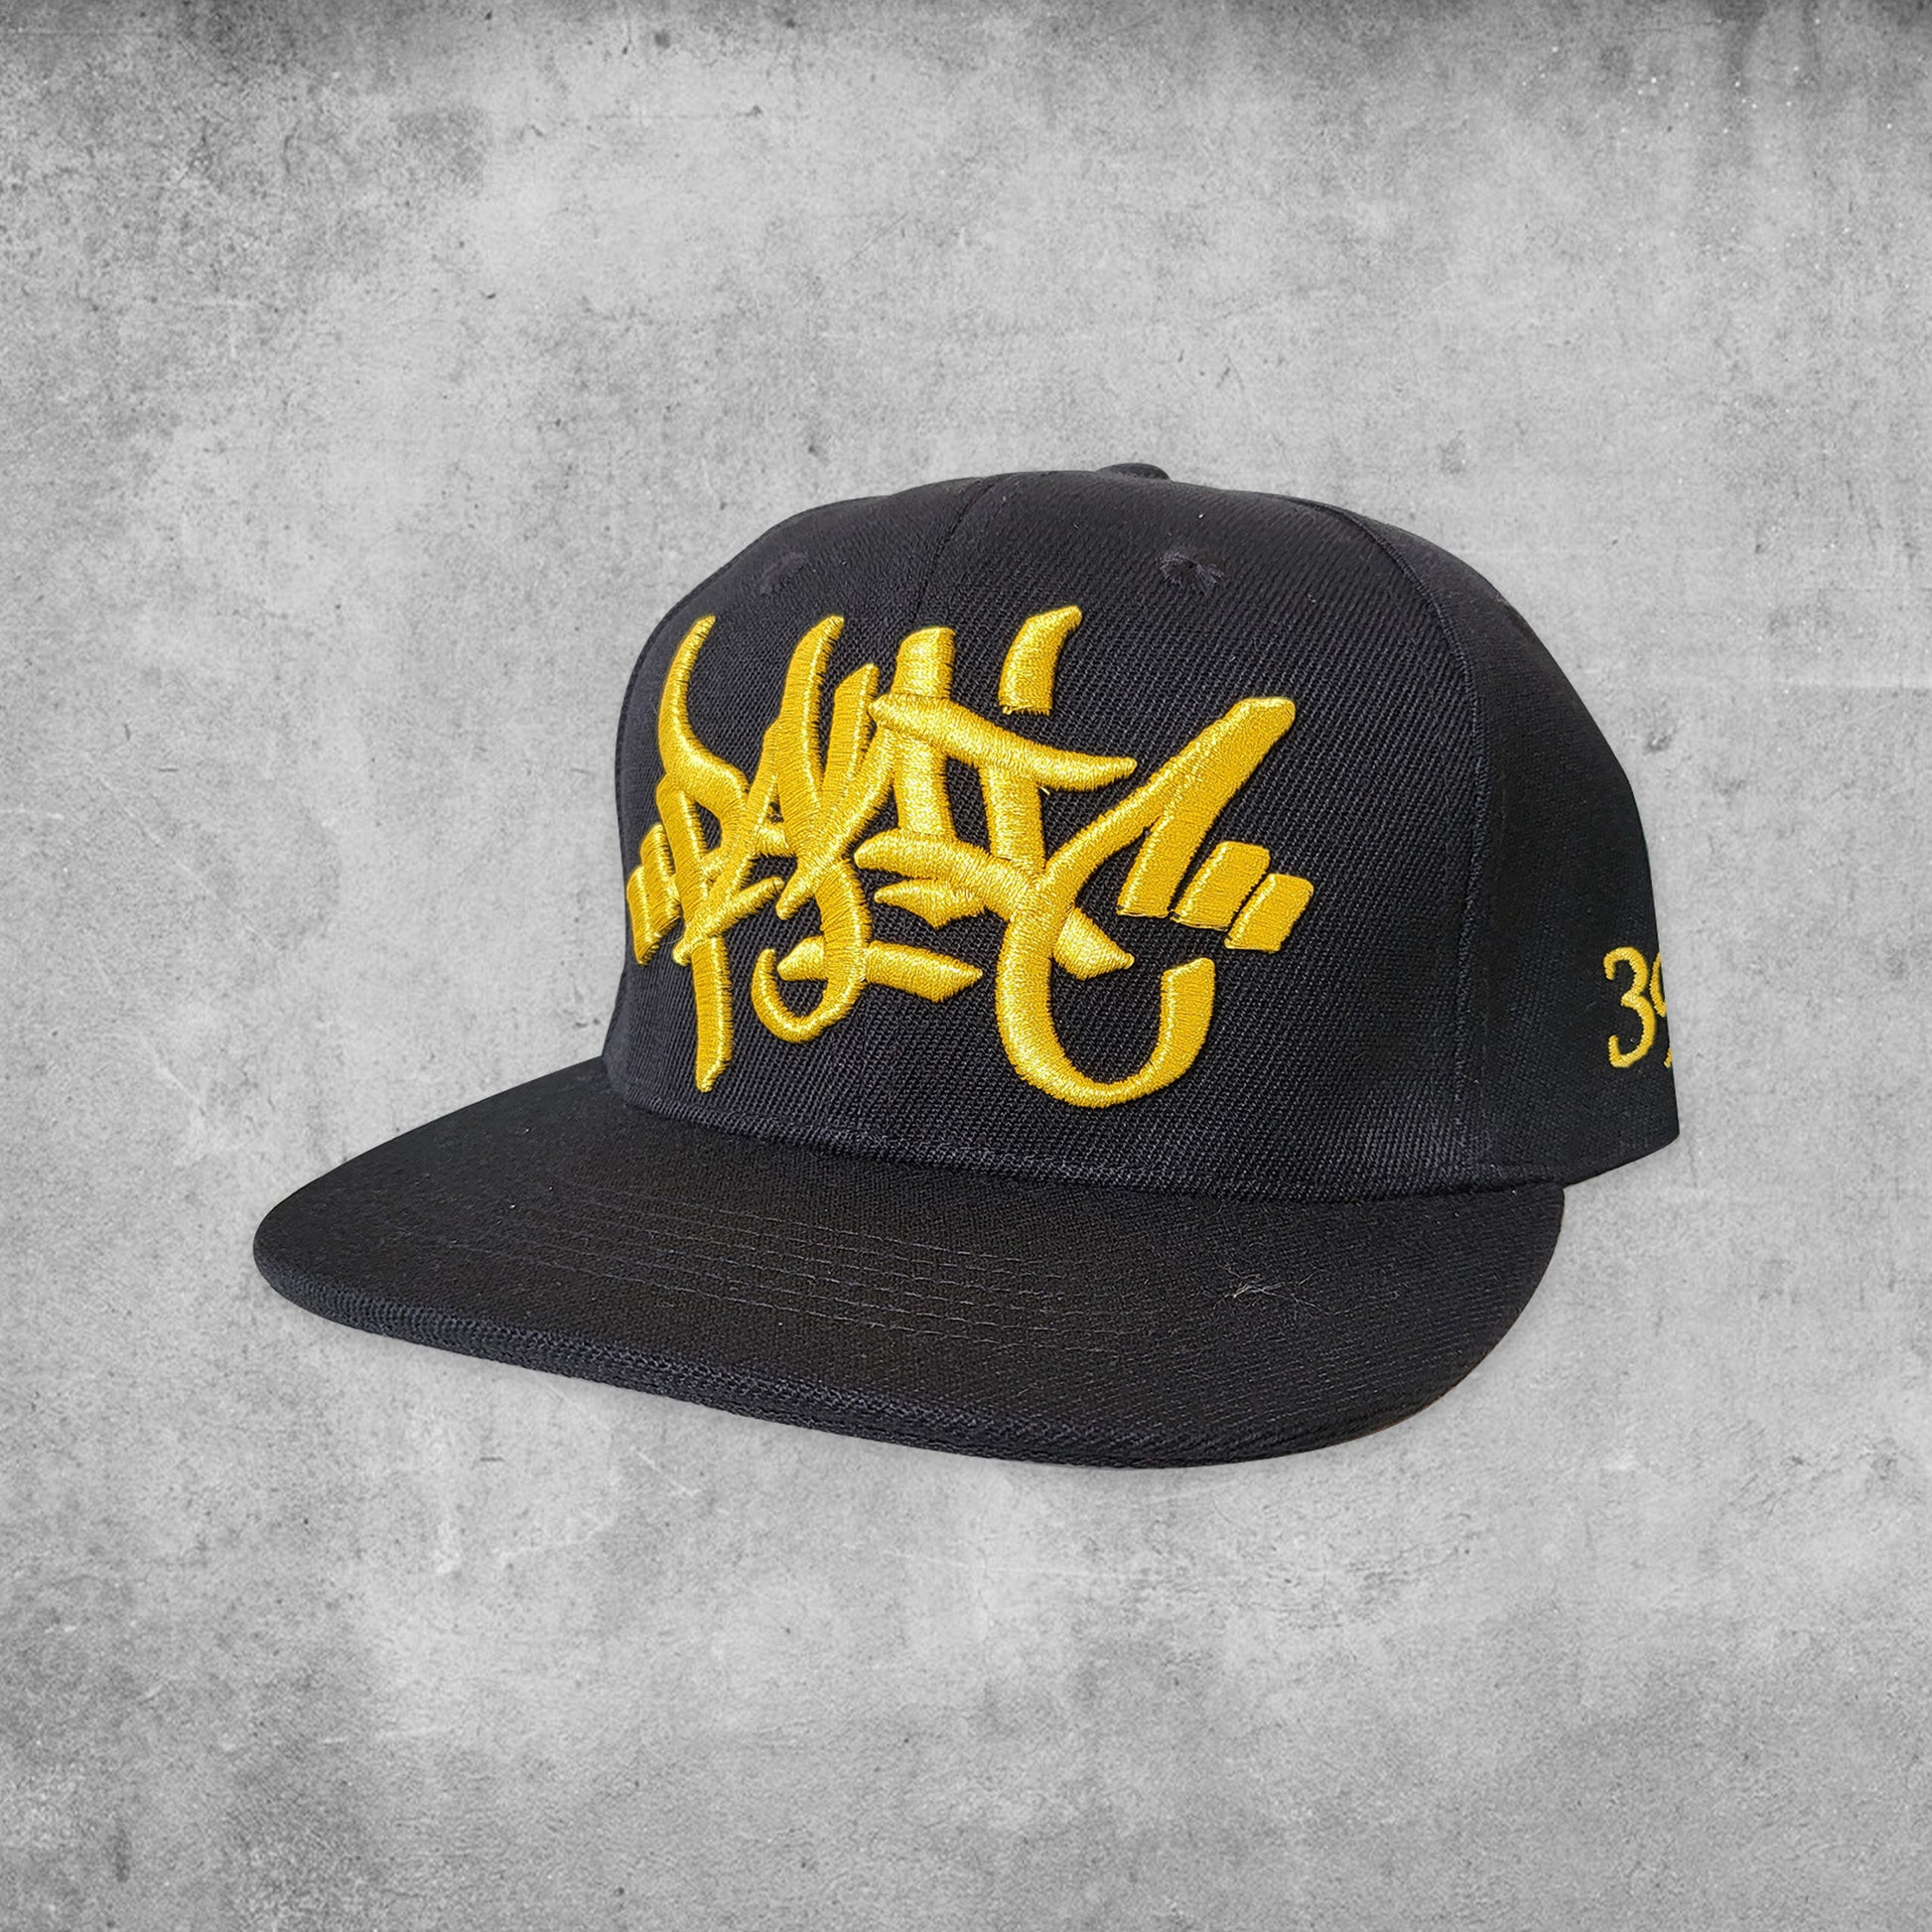 Panic 39 branded snap back hat in black with gold puff embroidery.